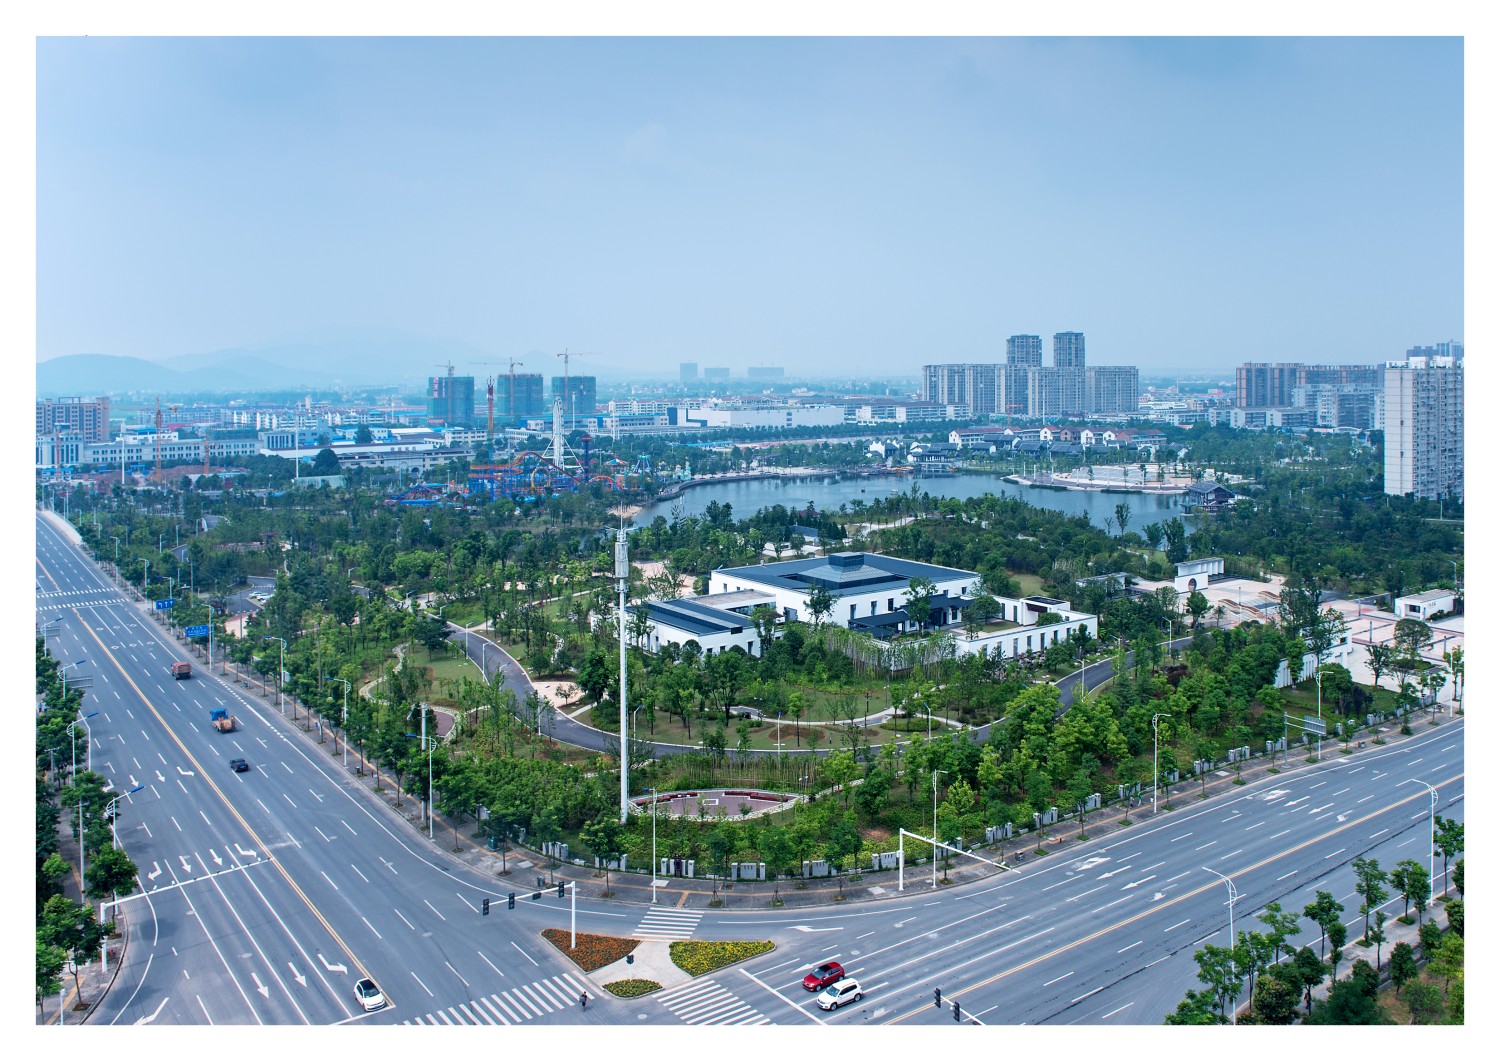 Lot 1 Construction Project of Dingling Park in Changde (2019 National Quality Engineering Project)